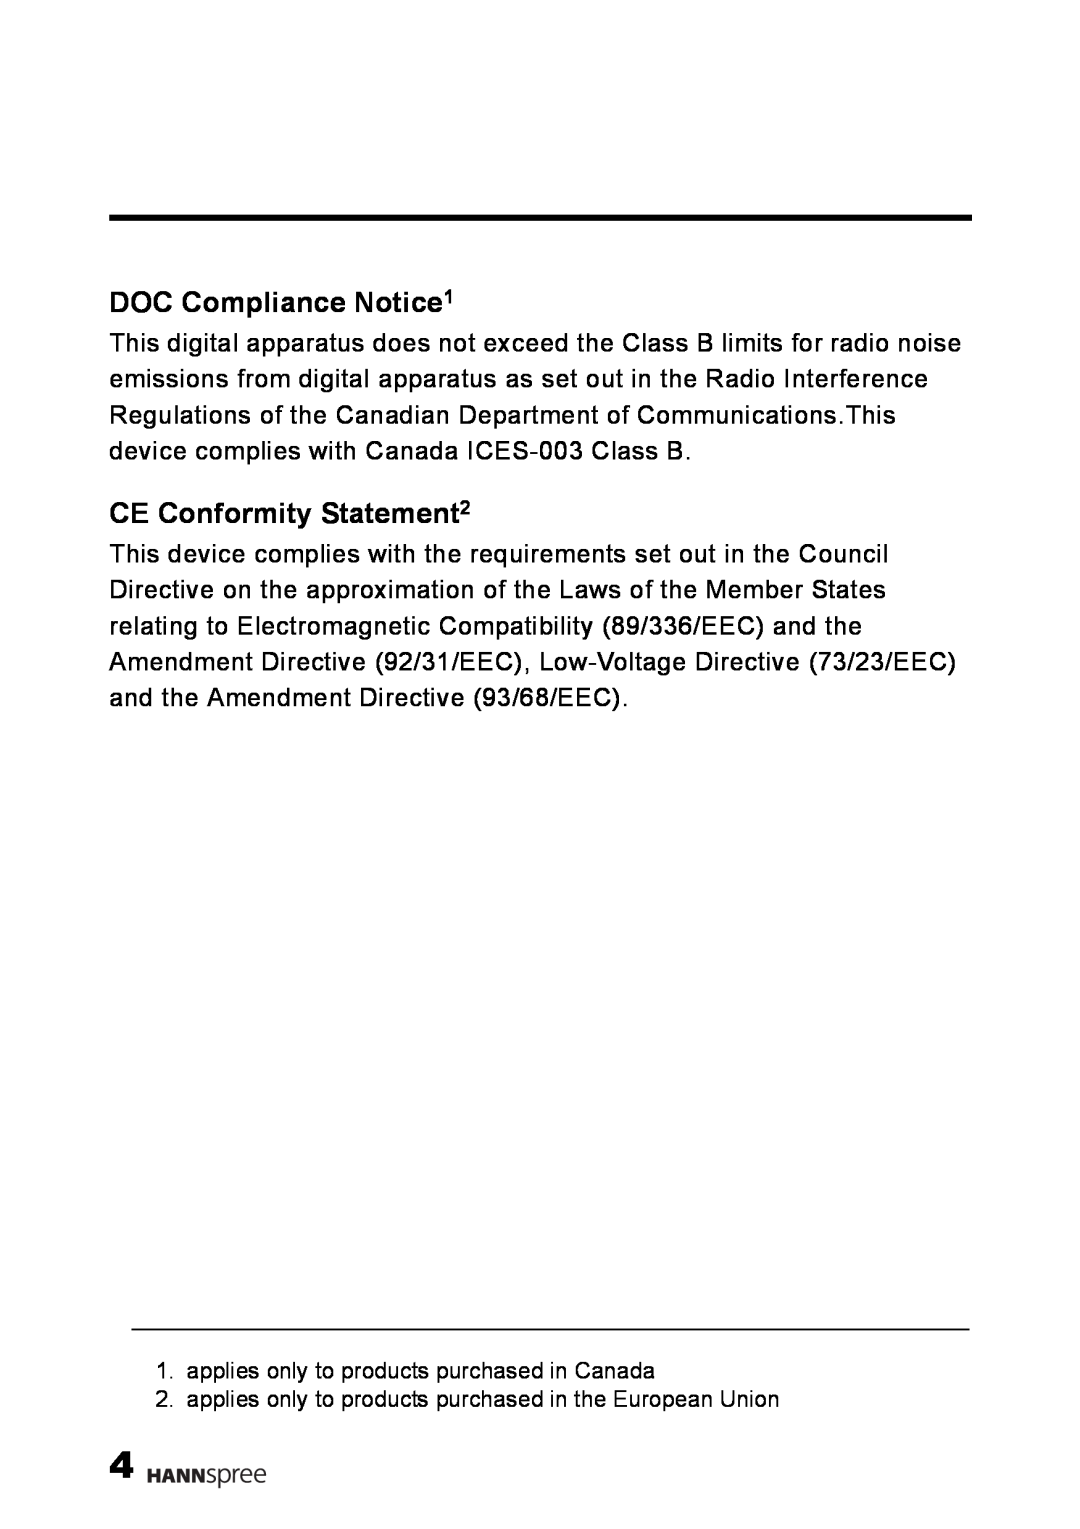 HANNspree LT09-10U1-000 DOC Compliance Notice1, CE Conformity Statement2, applies only to products purchased in Canada 